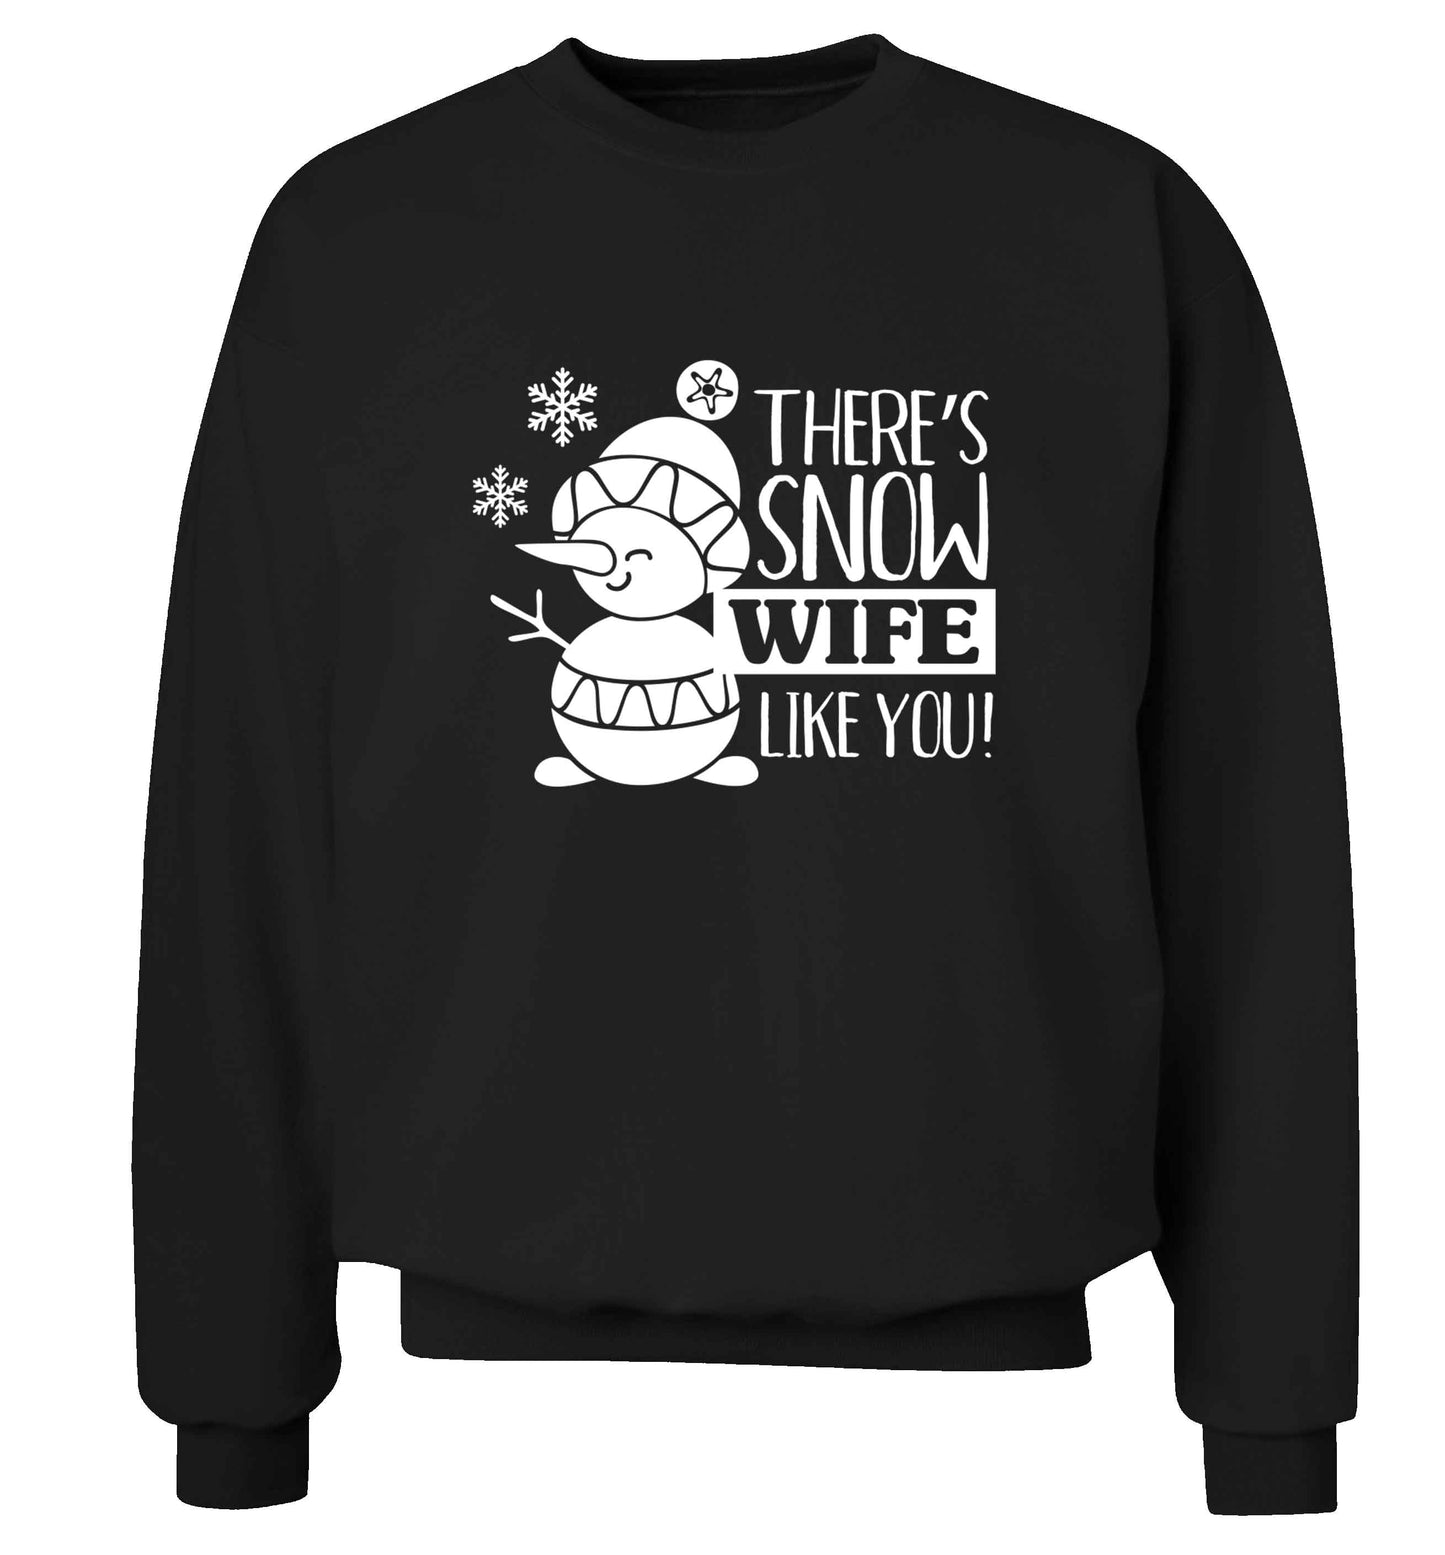 There's snow wife like you adult's unisex black sweater 2XL